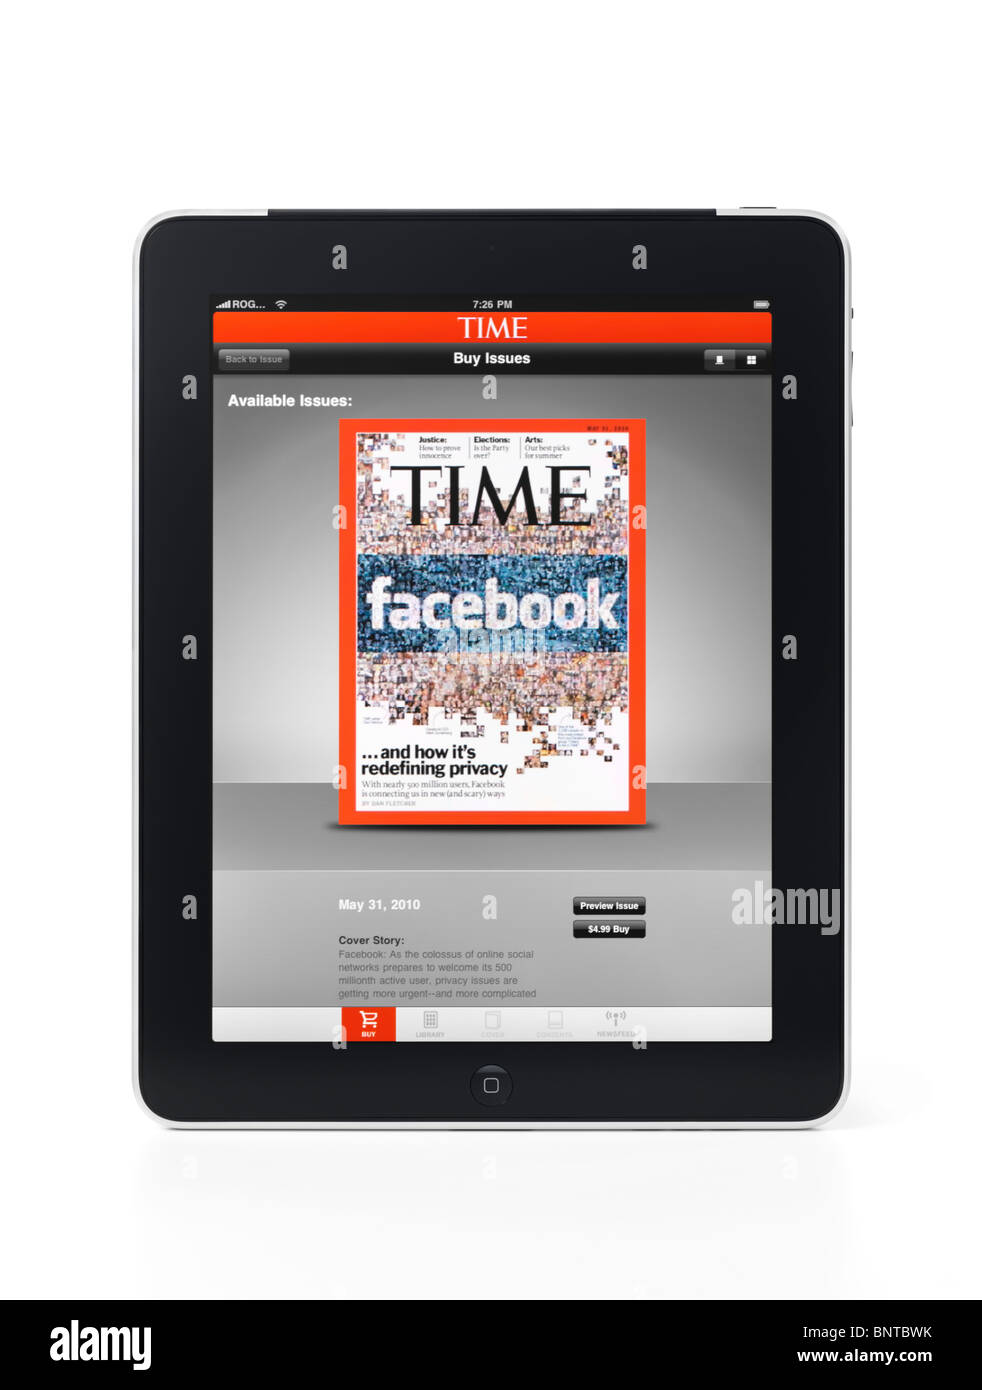 Apple iPad 3G tablet with Time Magazine facebook related cover at app store on its display isolated on white background Stock Photo